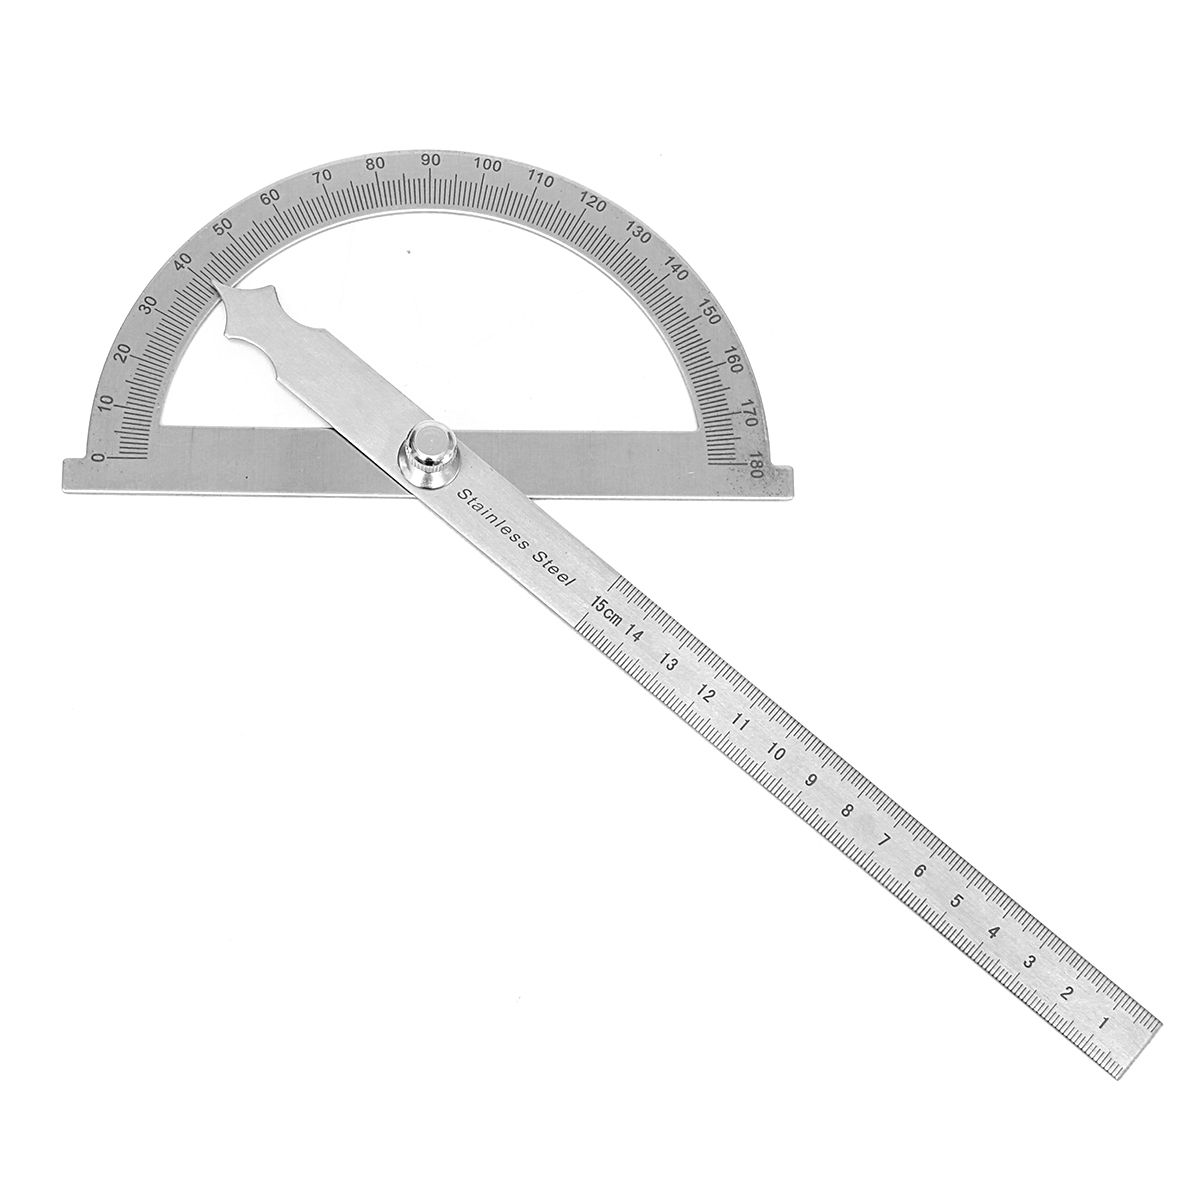 Detachable-Stainless-Steel-Round-Head-Rotary-Protractor-Angle-Ruler-Measuring-1362522